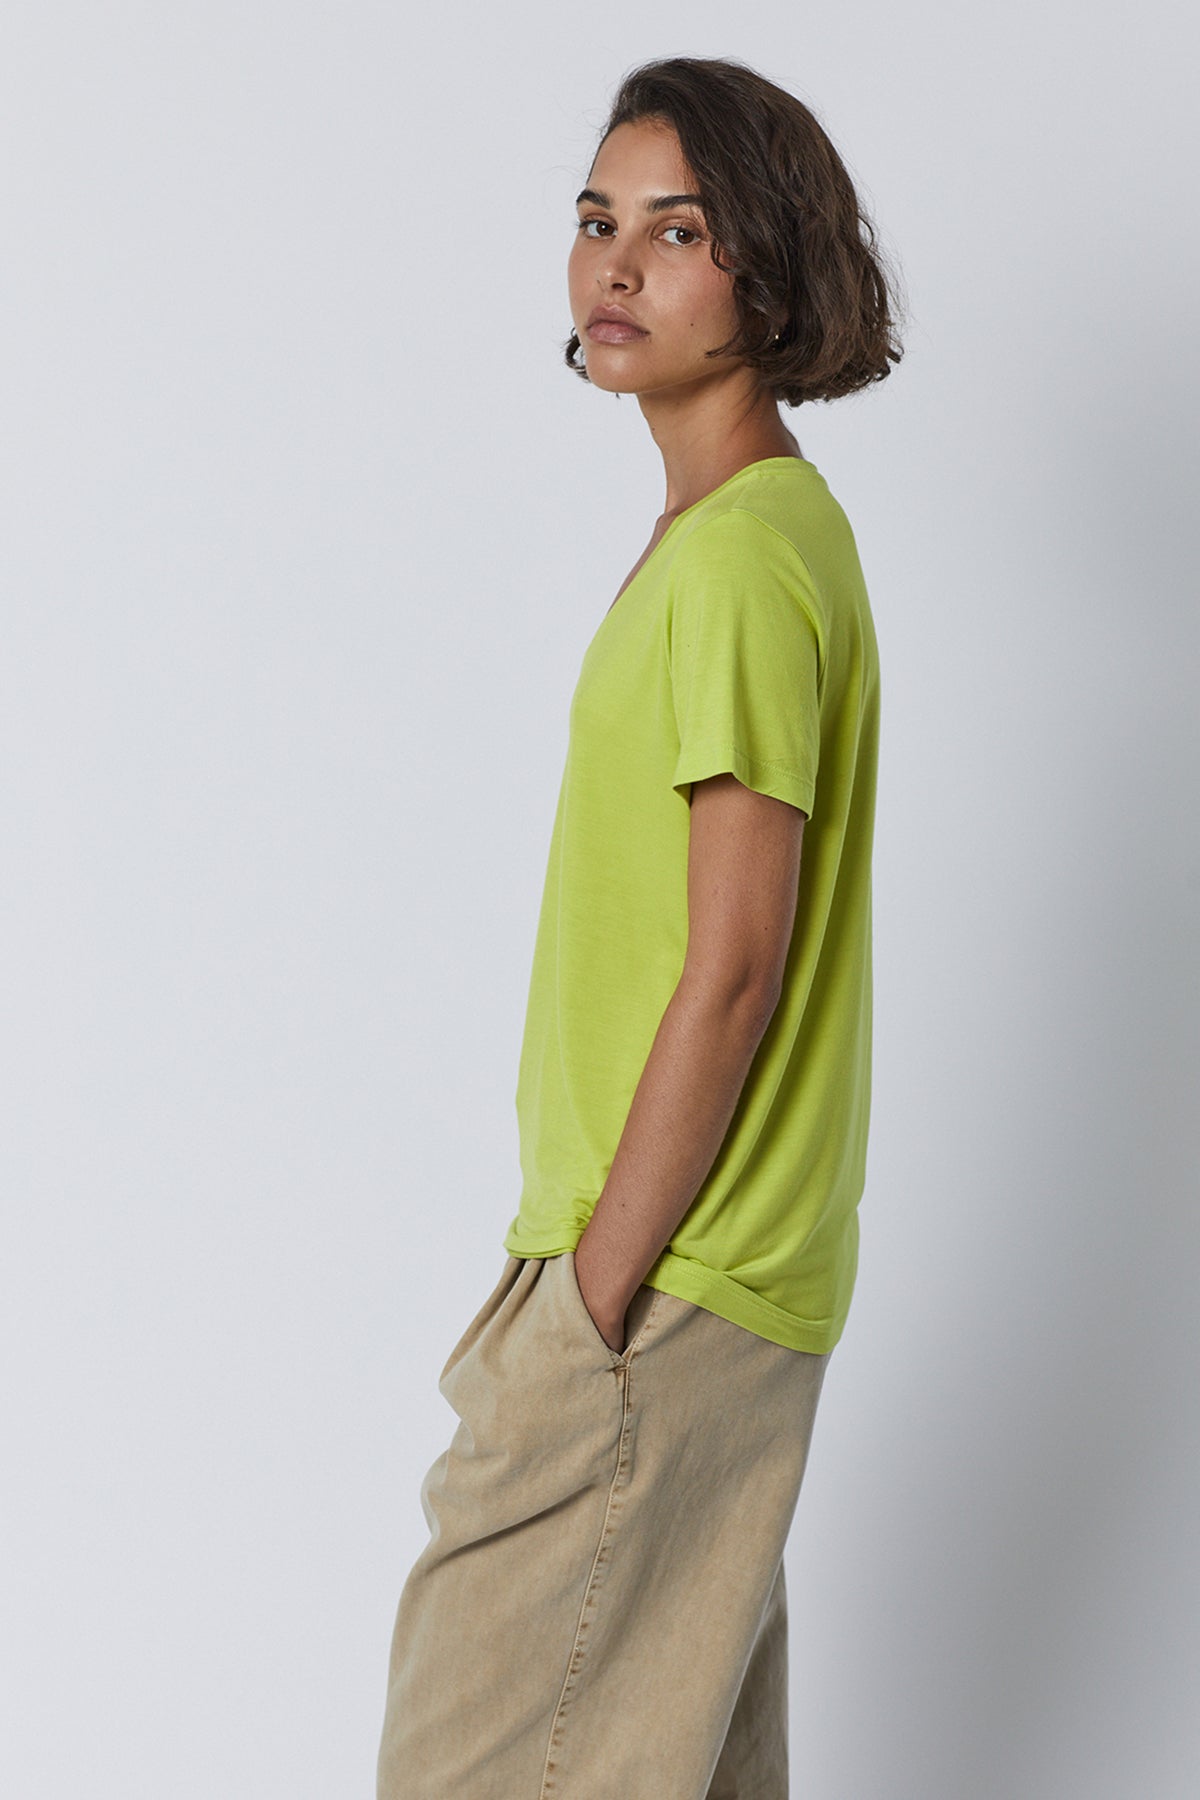 Runyon Tee in lime with Temescal pant in putty side-26007207411905